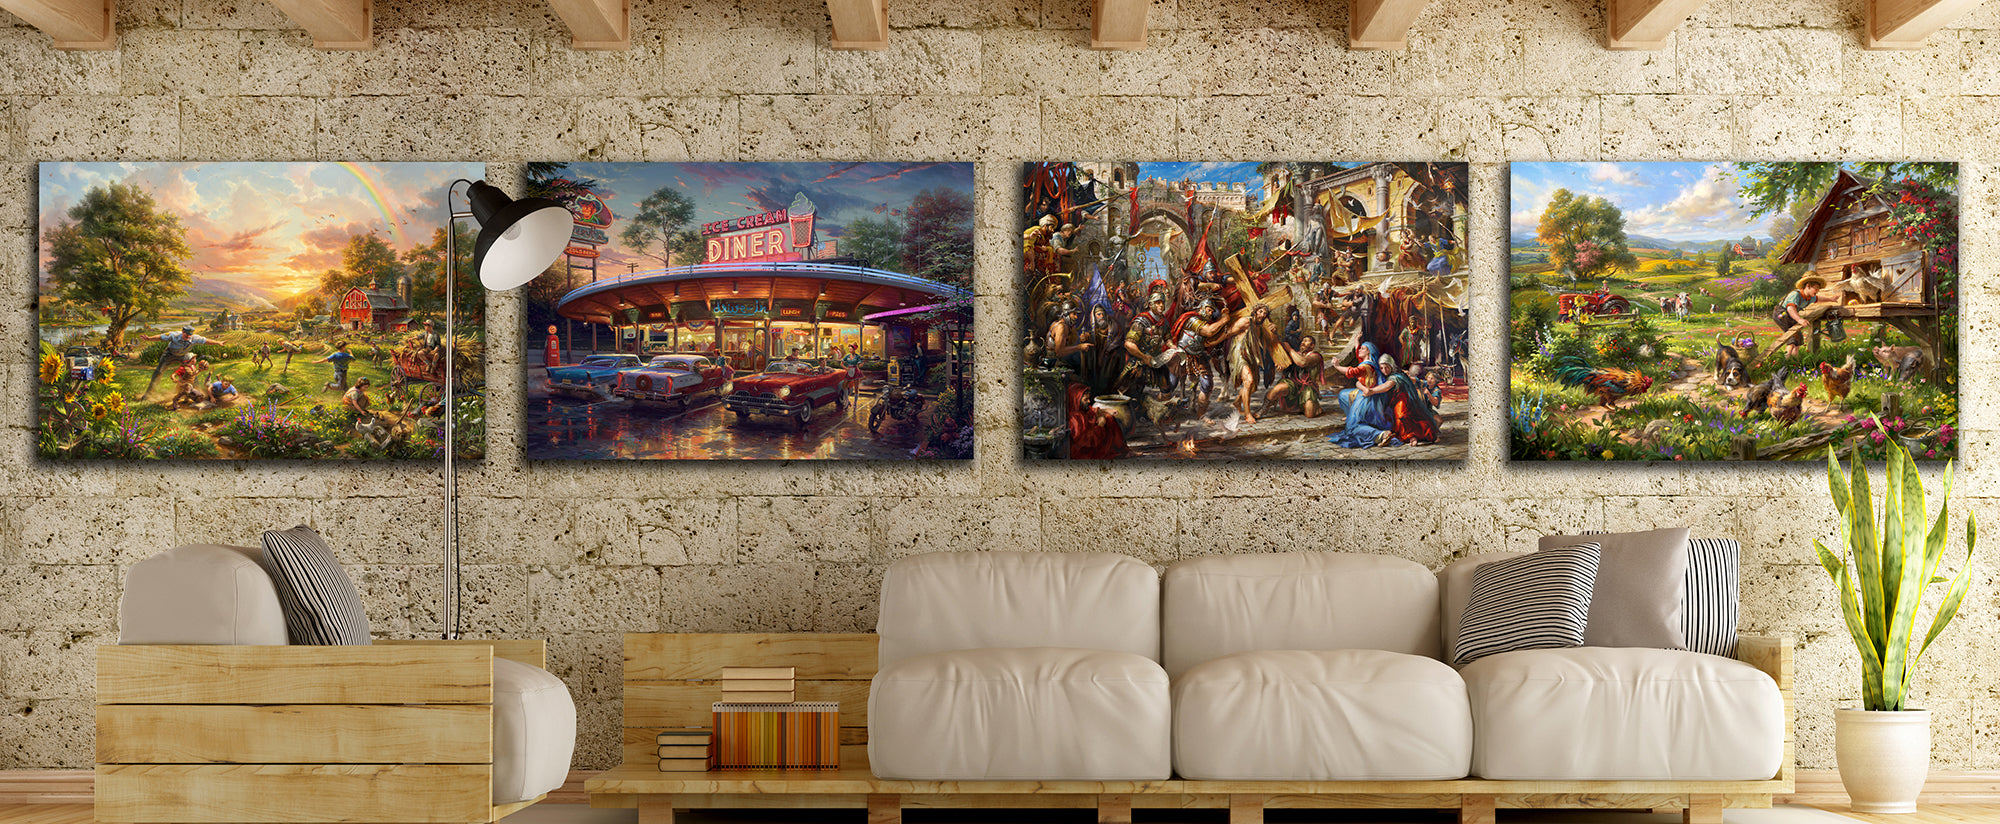 showcase renaissance revival images paintings and art pieces in a room setting - Blend Cota original oil painting - renaissance revival - blend cota studios art